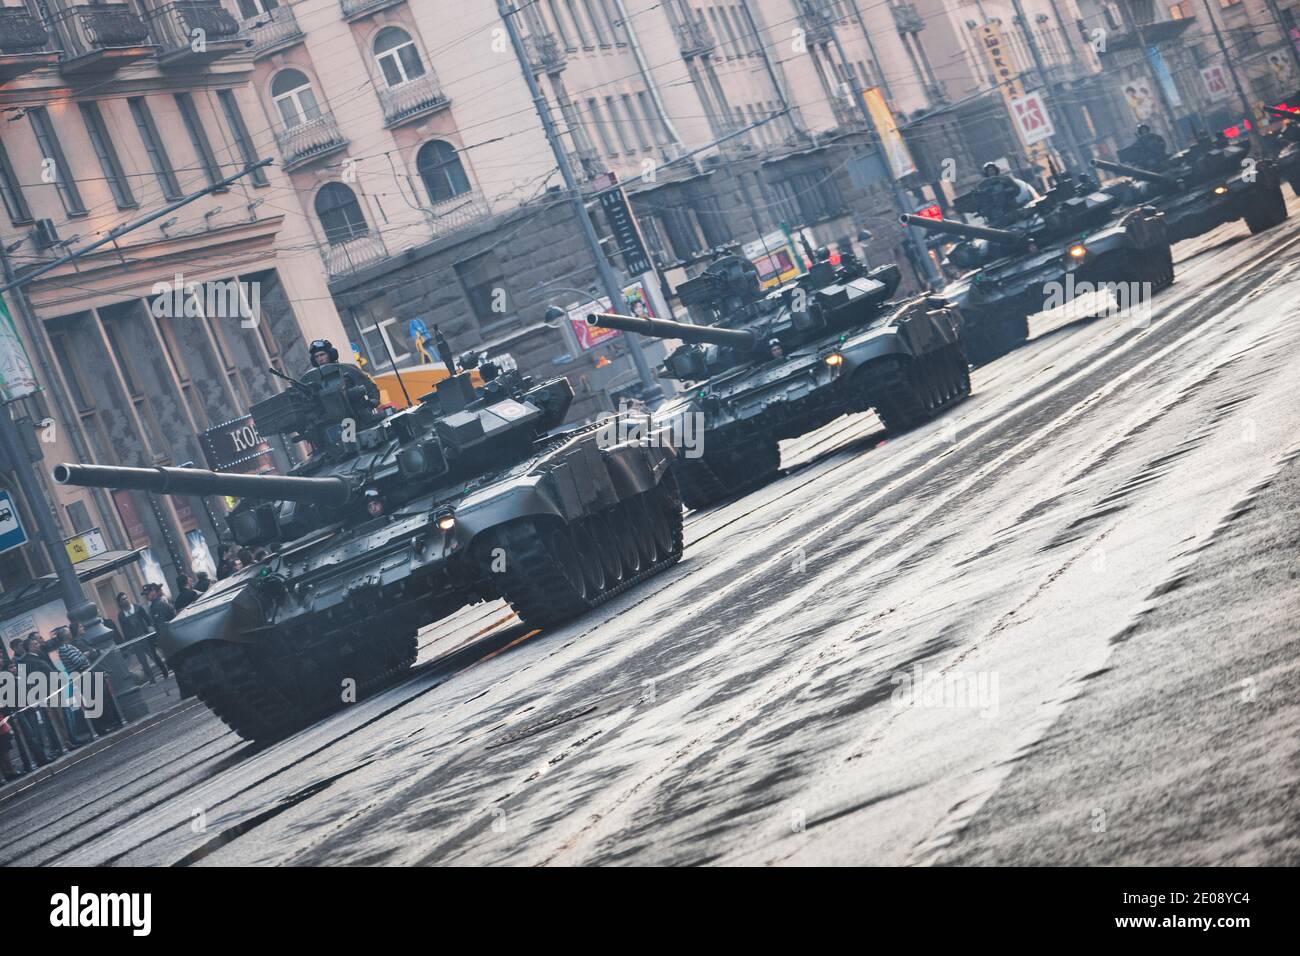 Rehearsal for the May 9 Victory Day parade Stock Photo